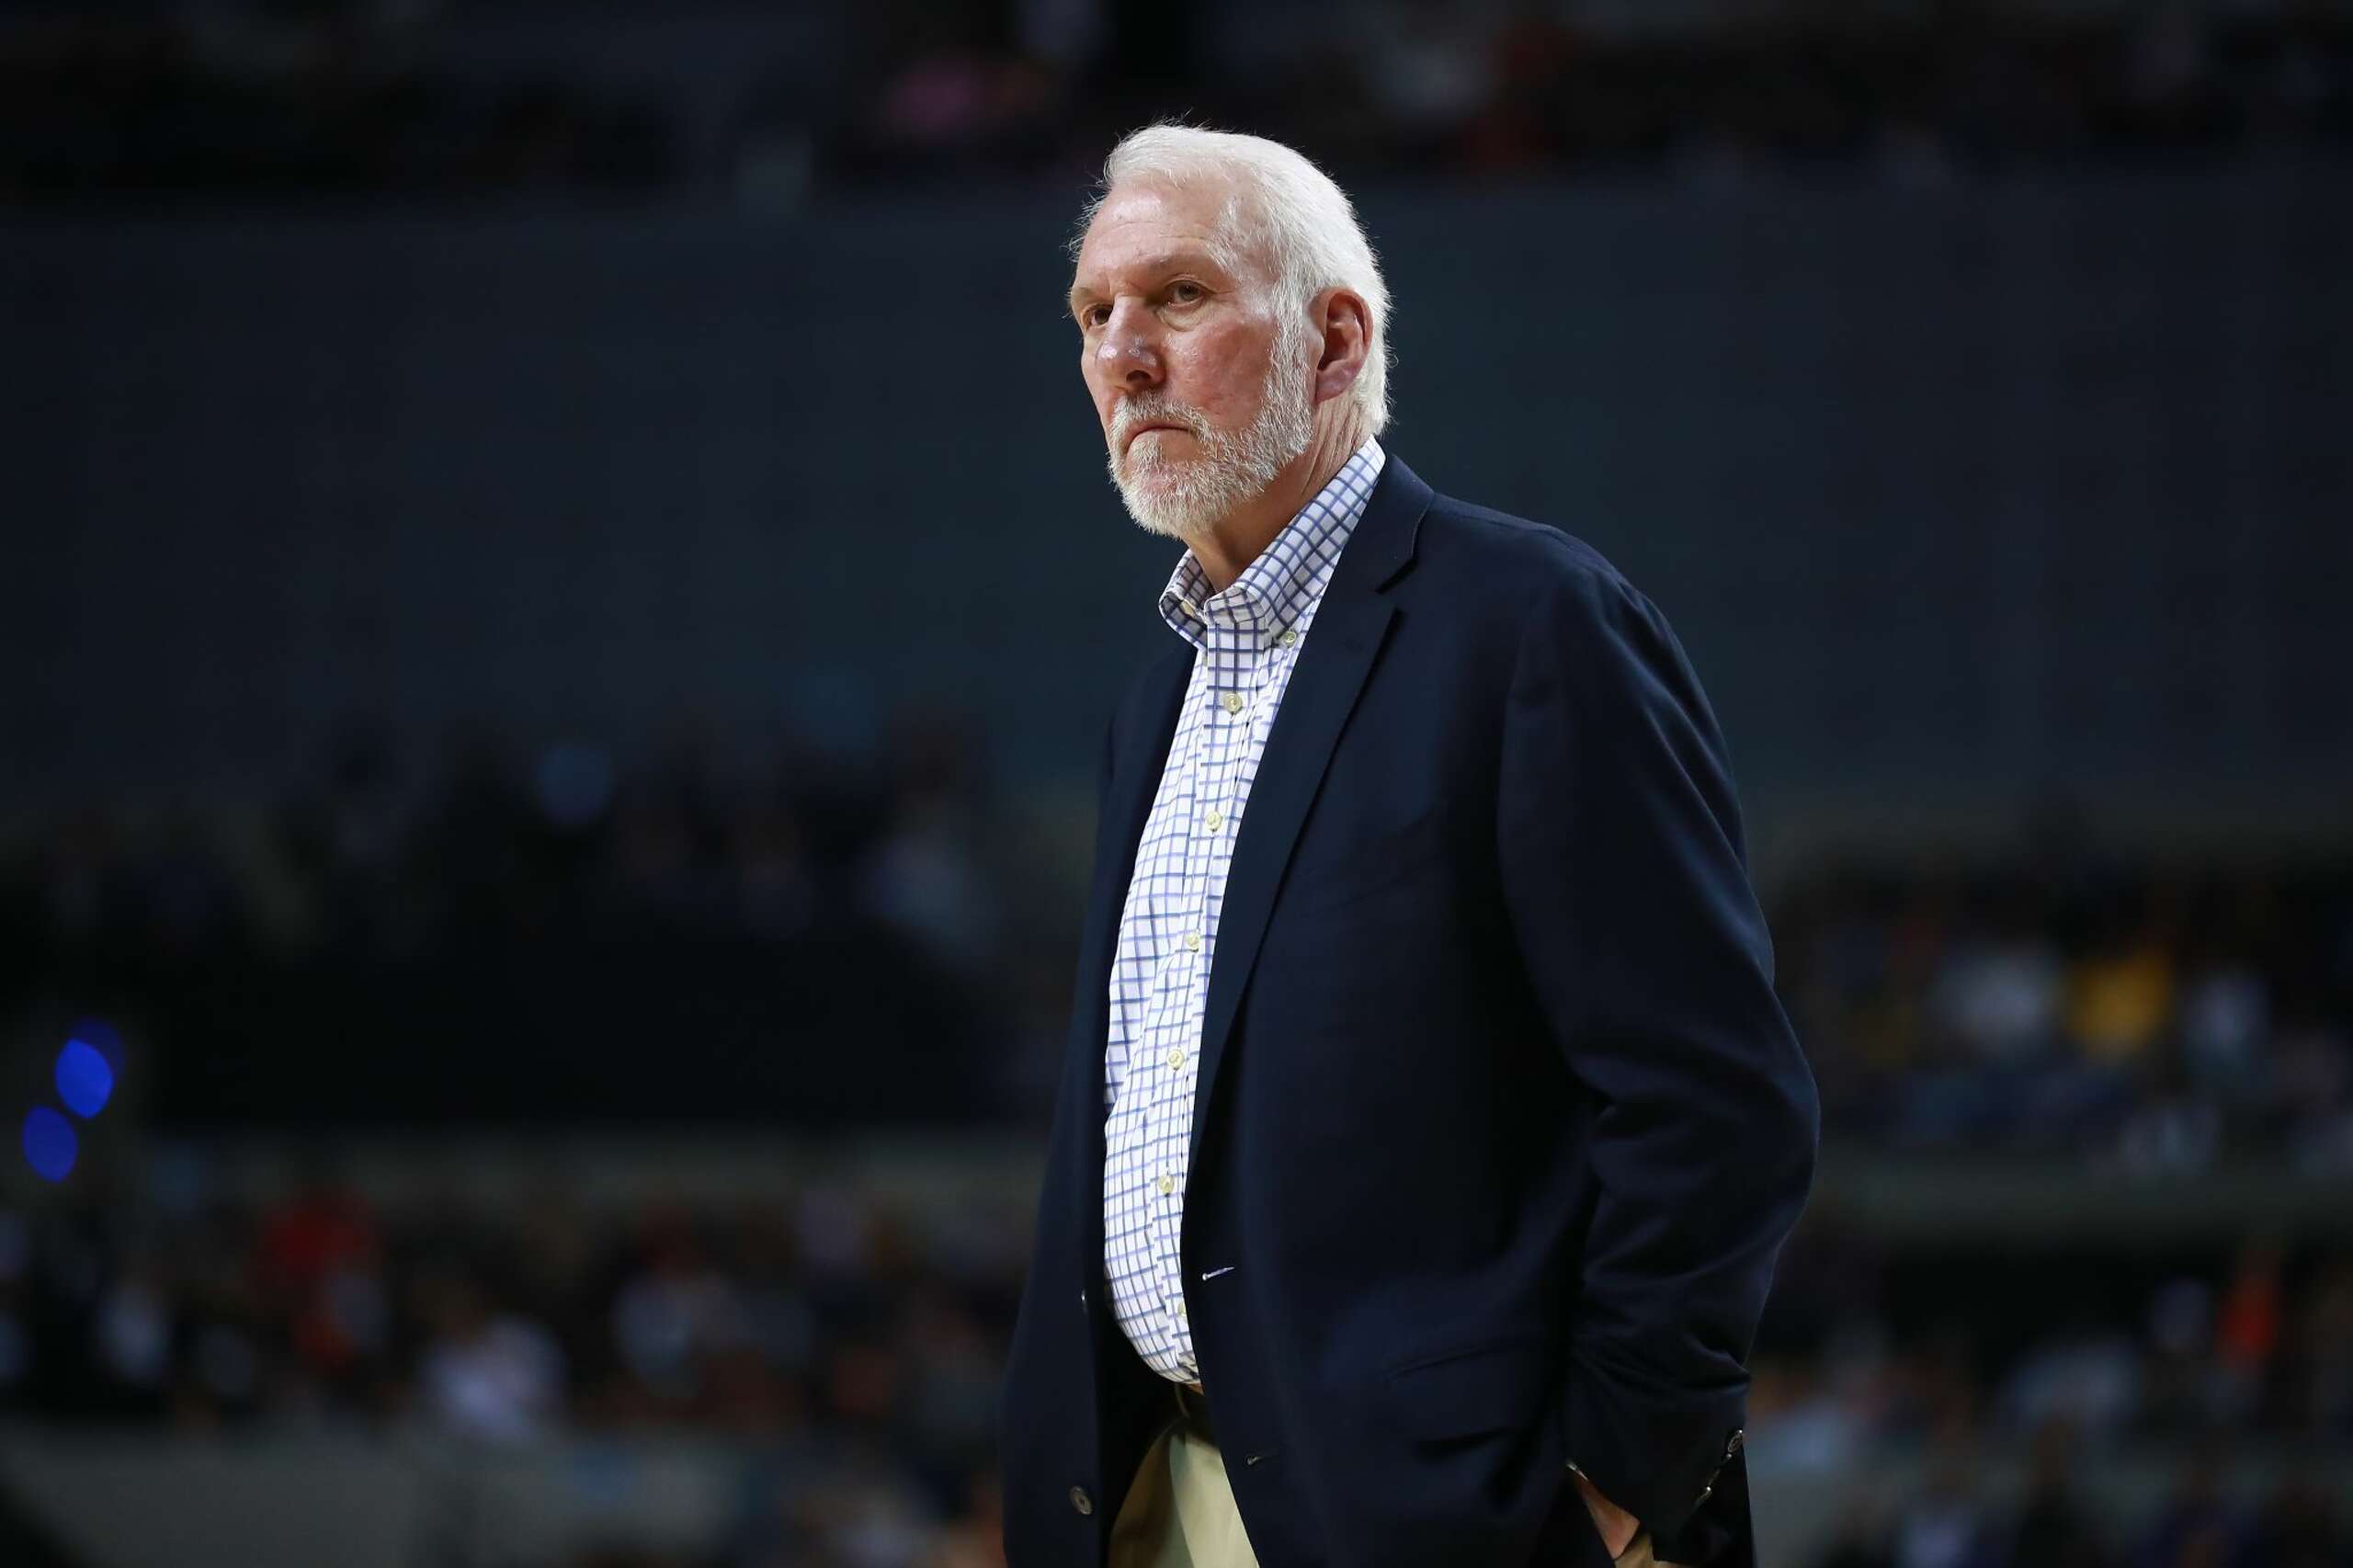 Putting Gregg Popovich's wins into perspective